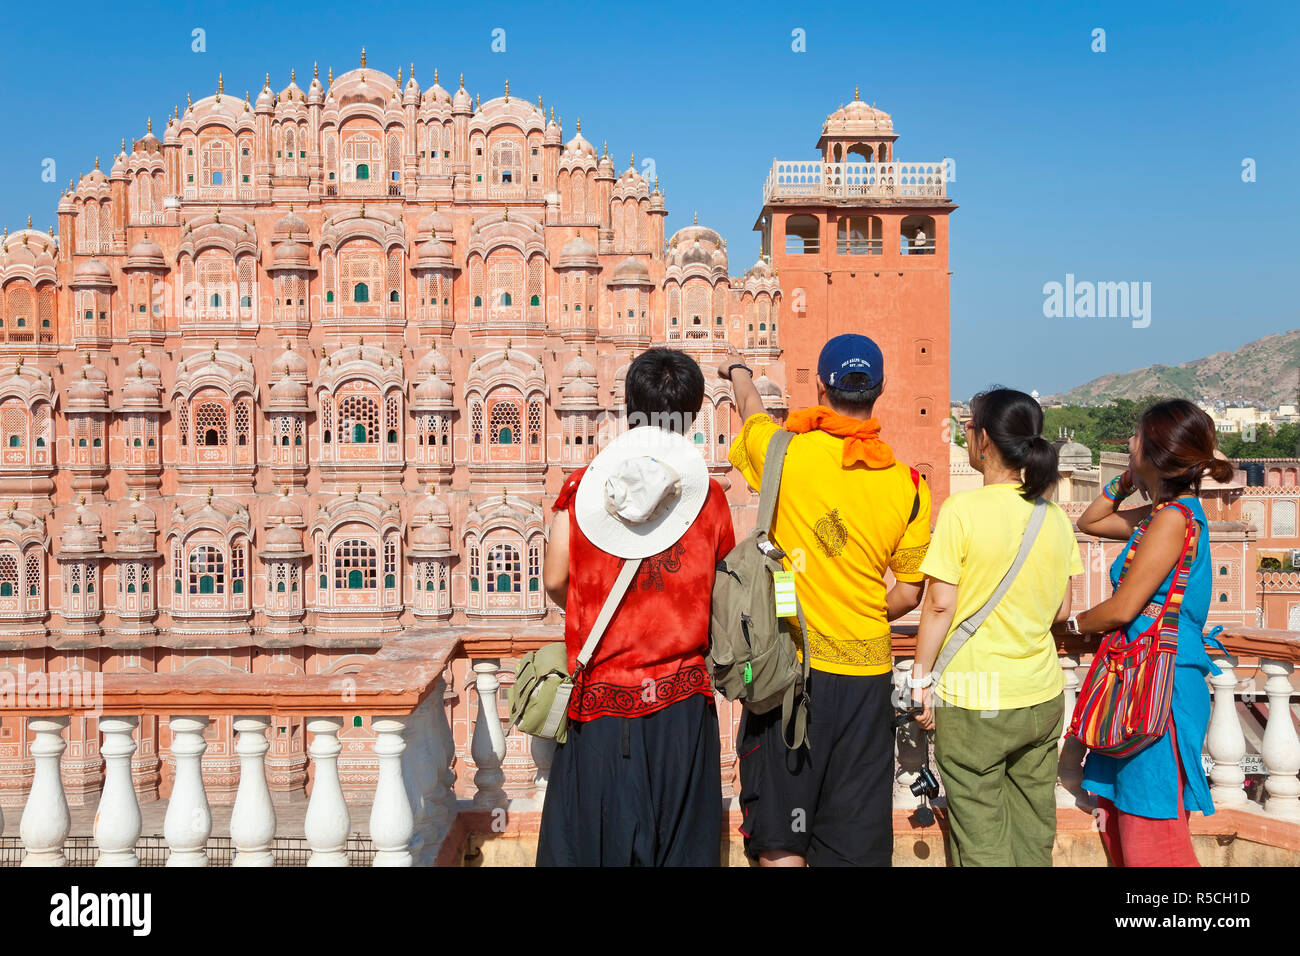 India, Rajasthan, Jaipur, Tourists viewing the Hawa Mahal, Palace of the Winds, built in 1799, (MR) Stock Photo